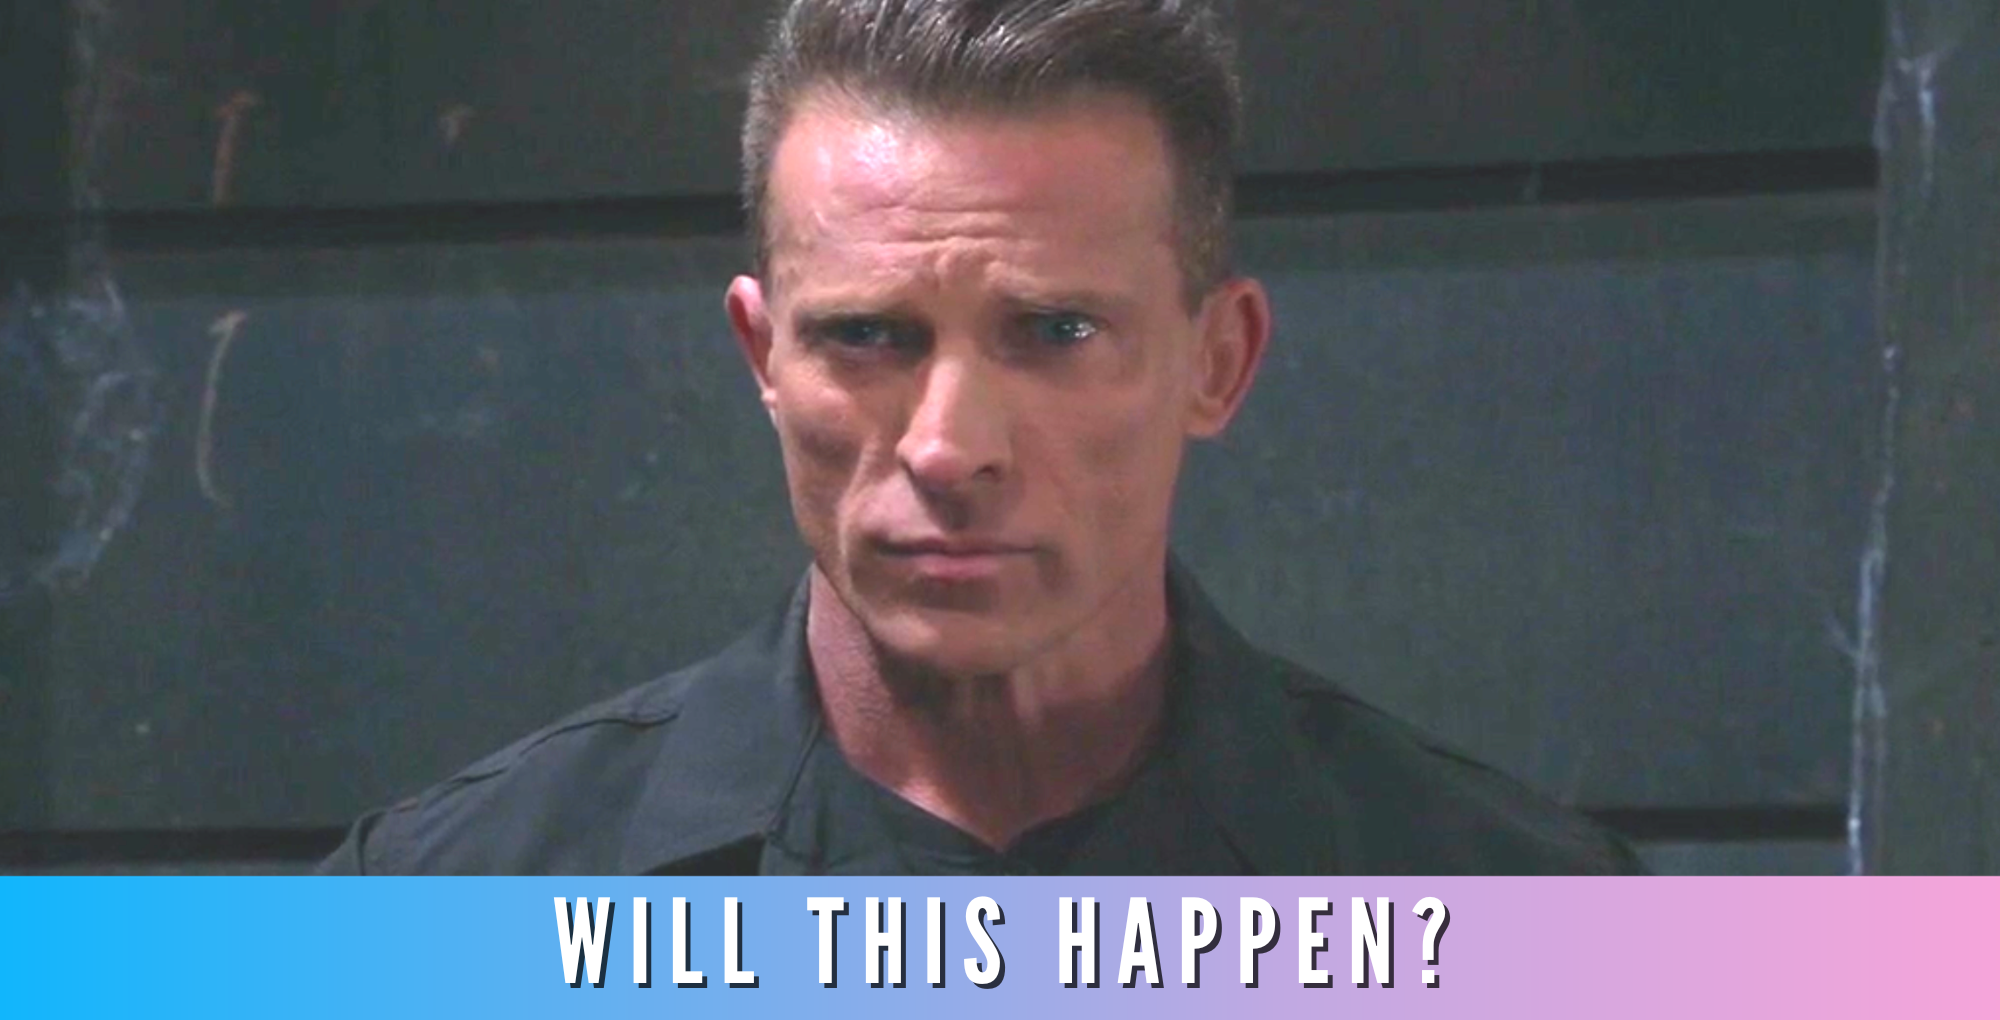 where in the world is jason morgan on general hospital?